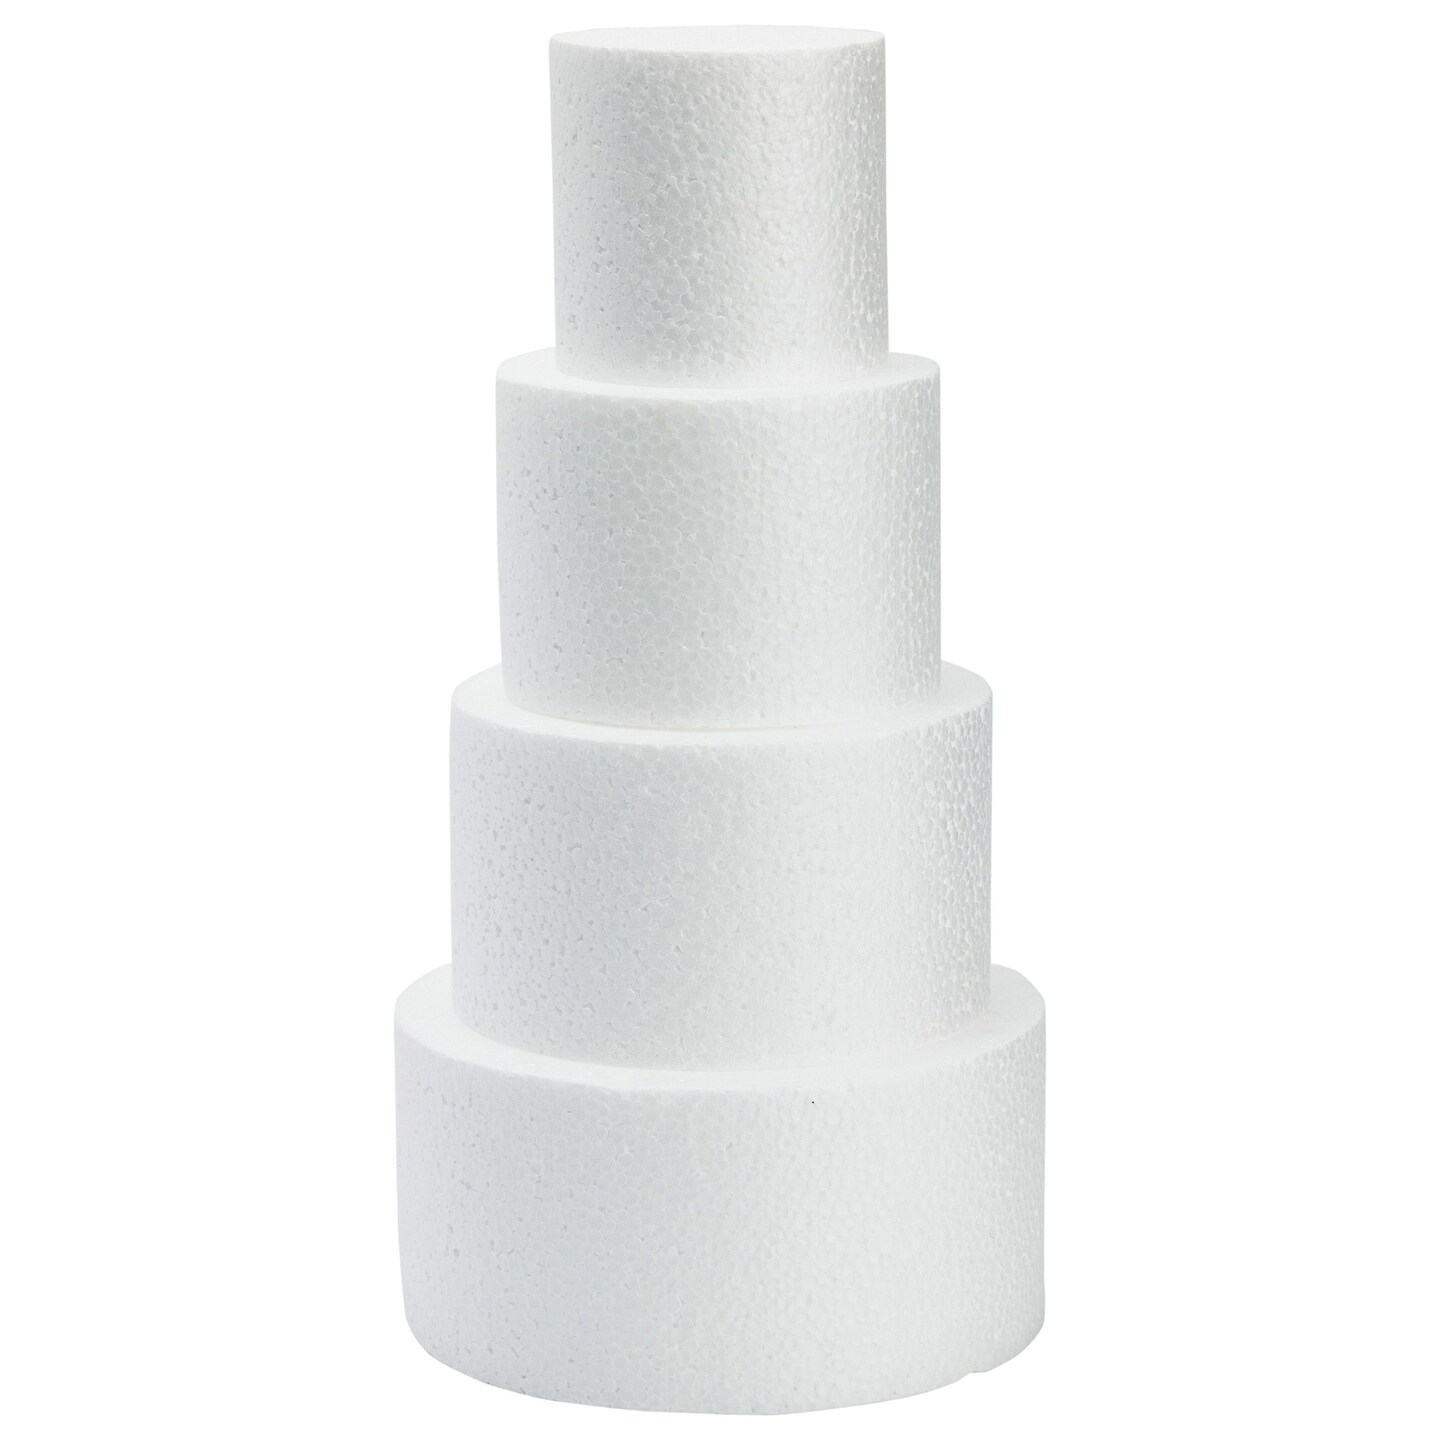 Cake Dummy | We Cut Cake Dummies in many sizes and shapes - WhiteClouds